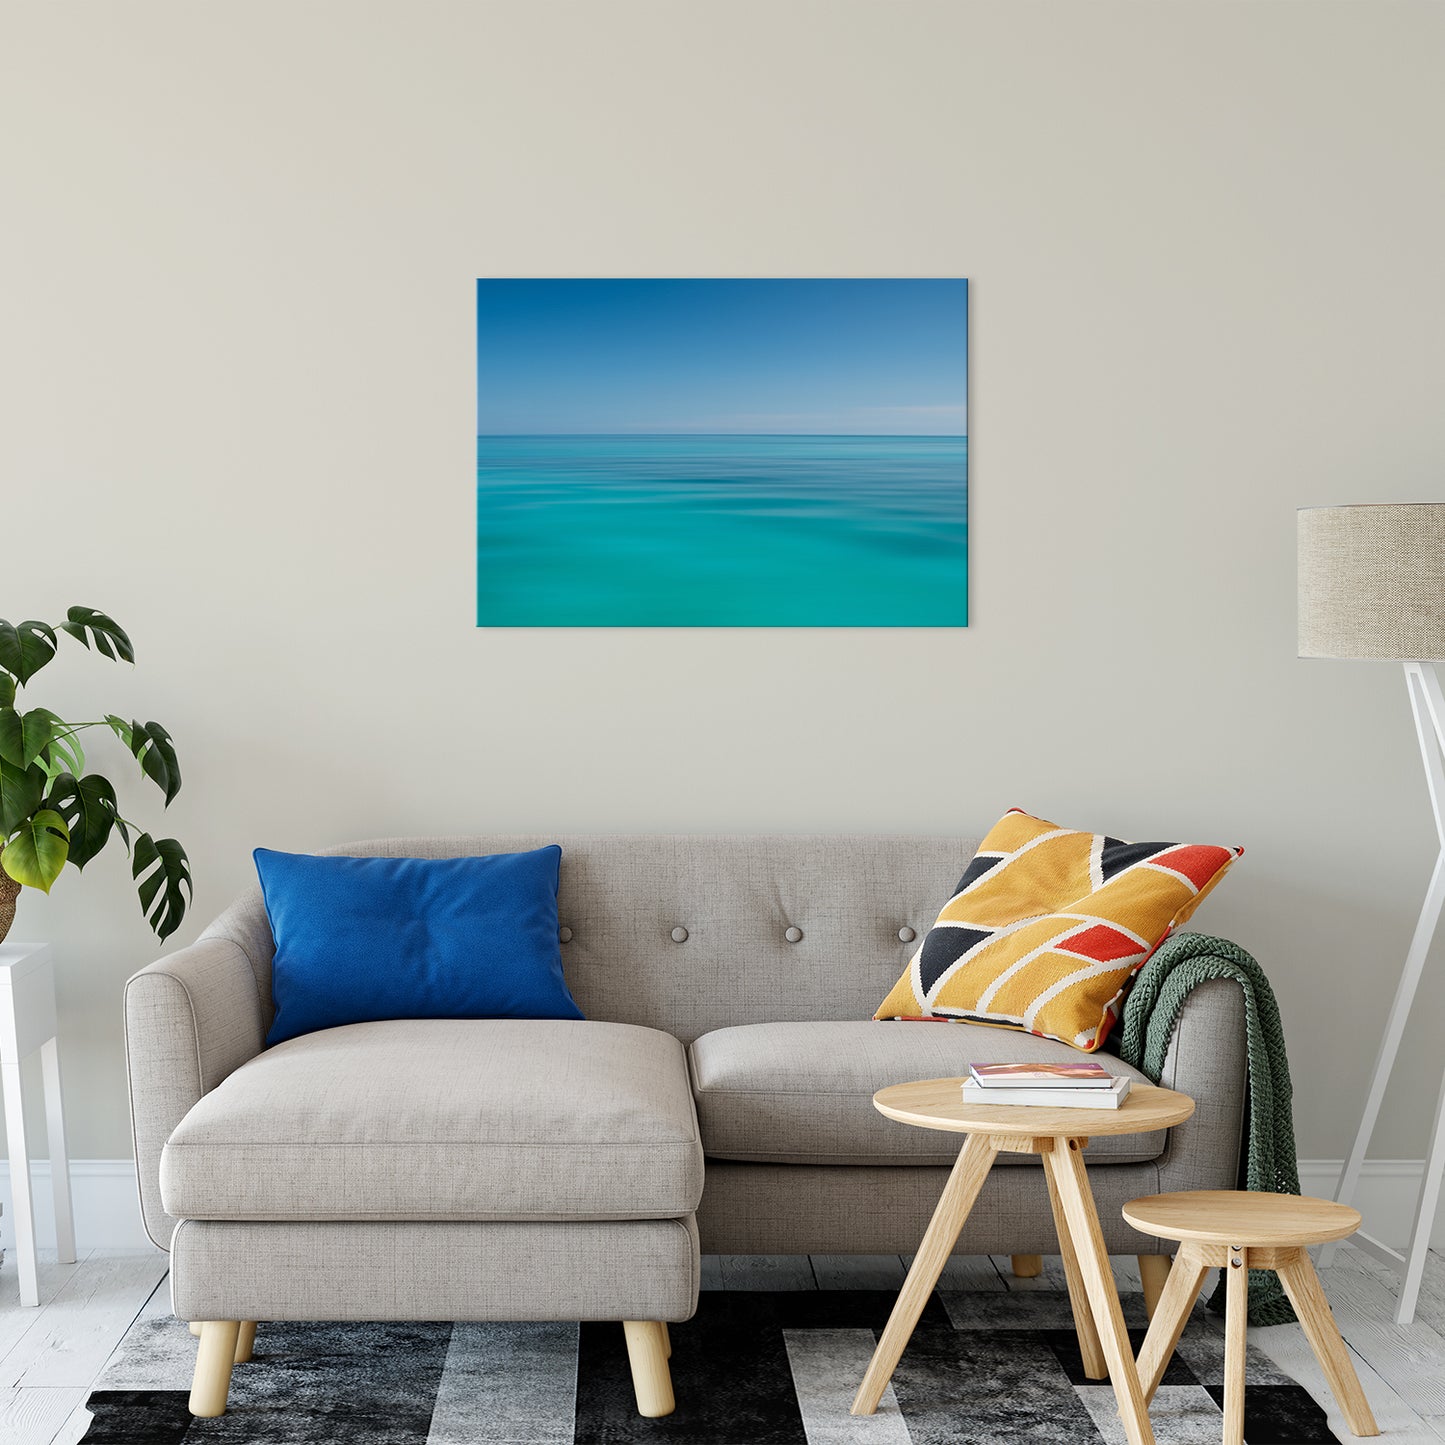 Colors of The Tropical Sea Abstract Coastal Landscape Fine Art Canvas Prints 24" x 36" - PIPAFINEART